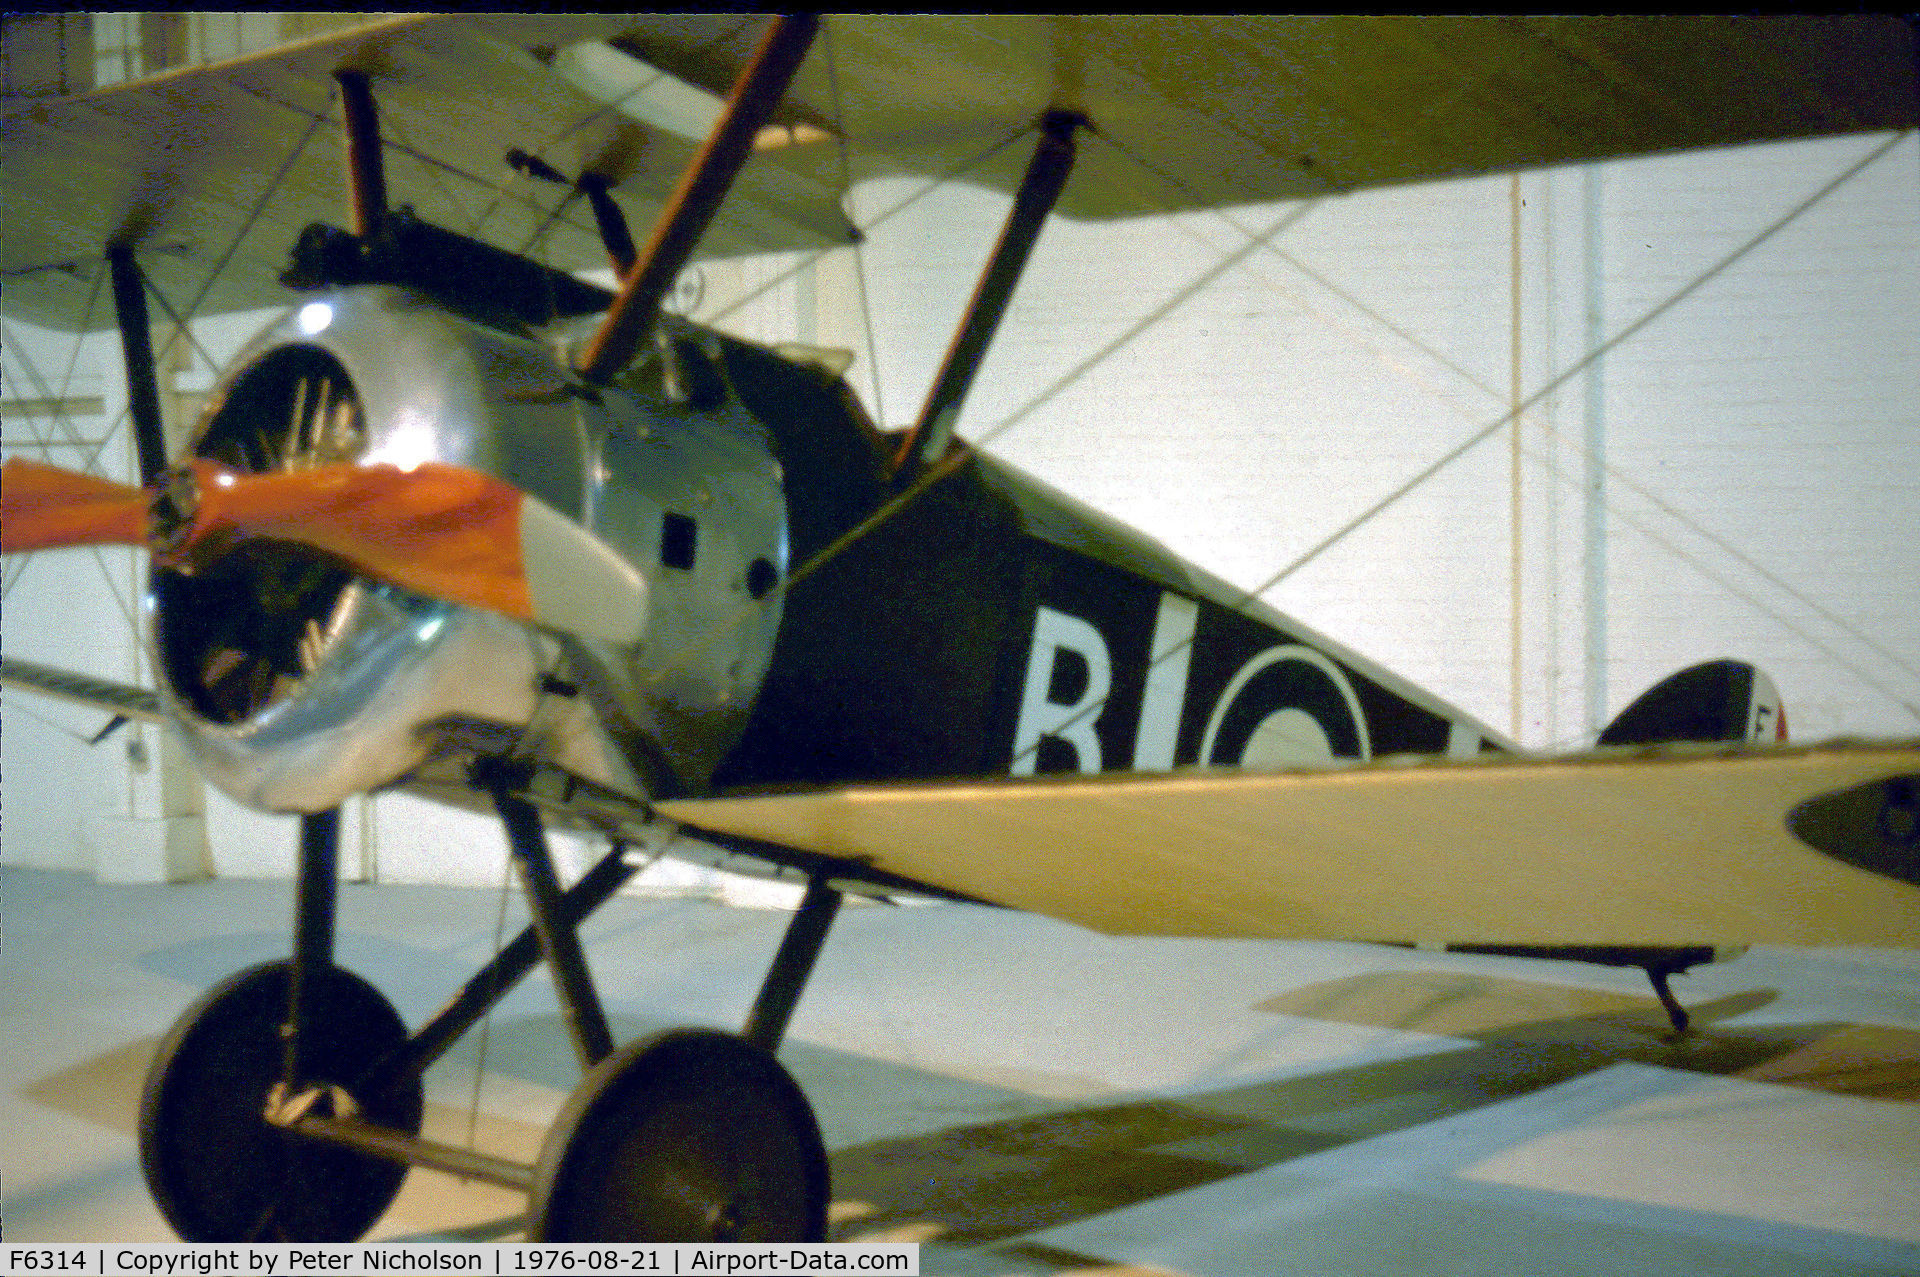 F6314, Sopwith F.1 Camel C/N Not found F6314, Sopwith Camel F.1 as displayed at the Royal Air Force Museum at Hendon in August 1976.